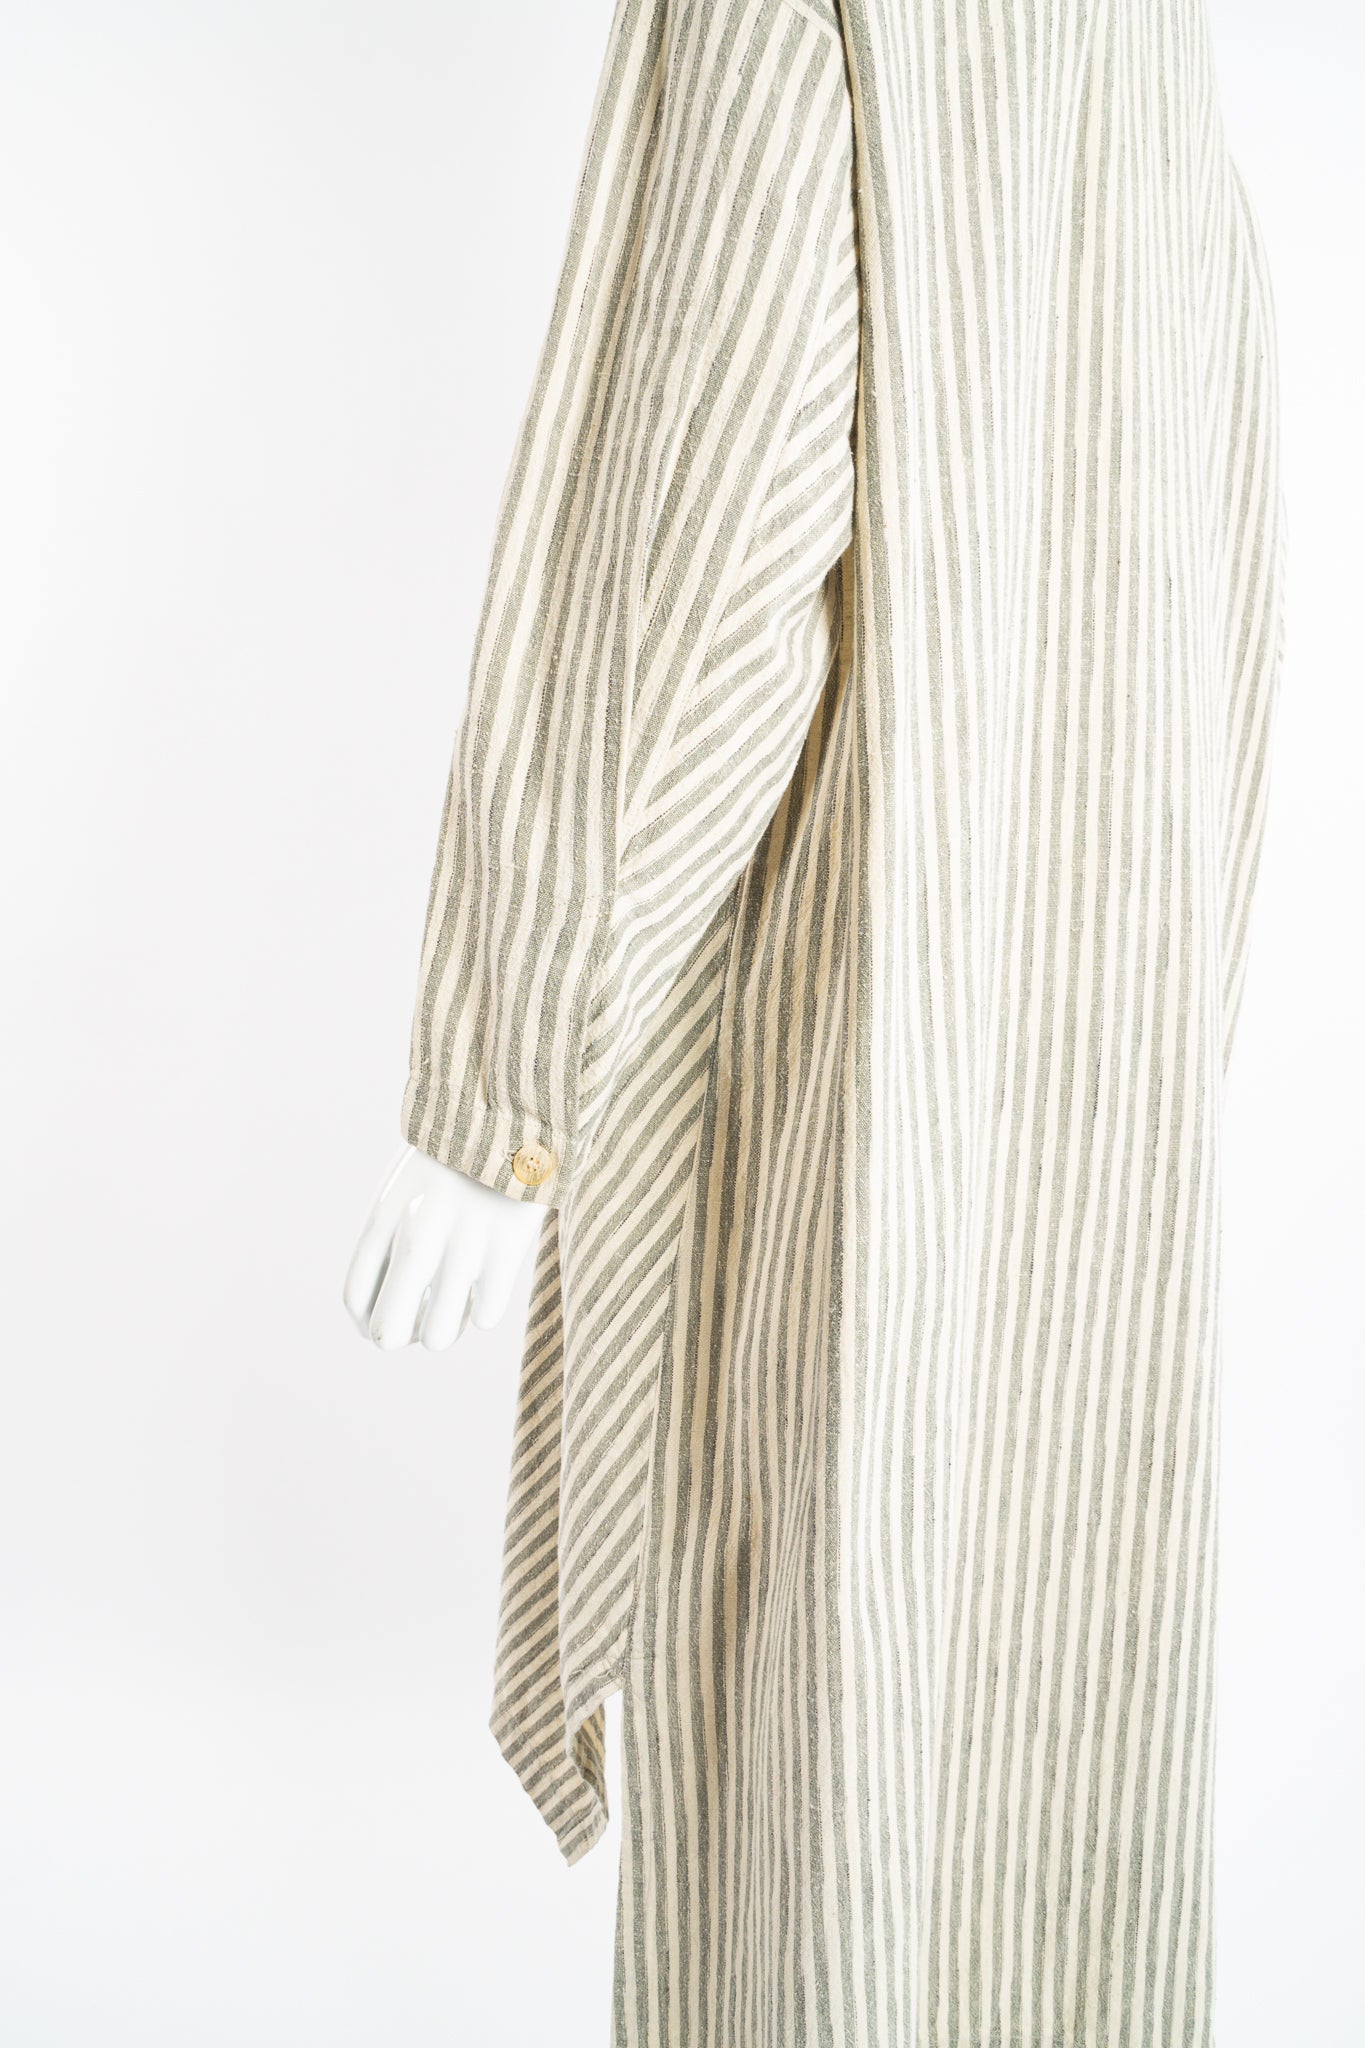 Vintage Issey Miyake Cotton Striped Duster Jacket on Mannequin sleeve detail at Recess Los Angeles